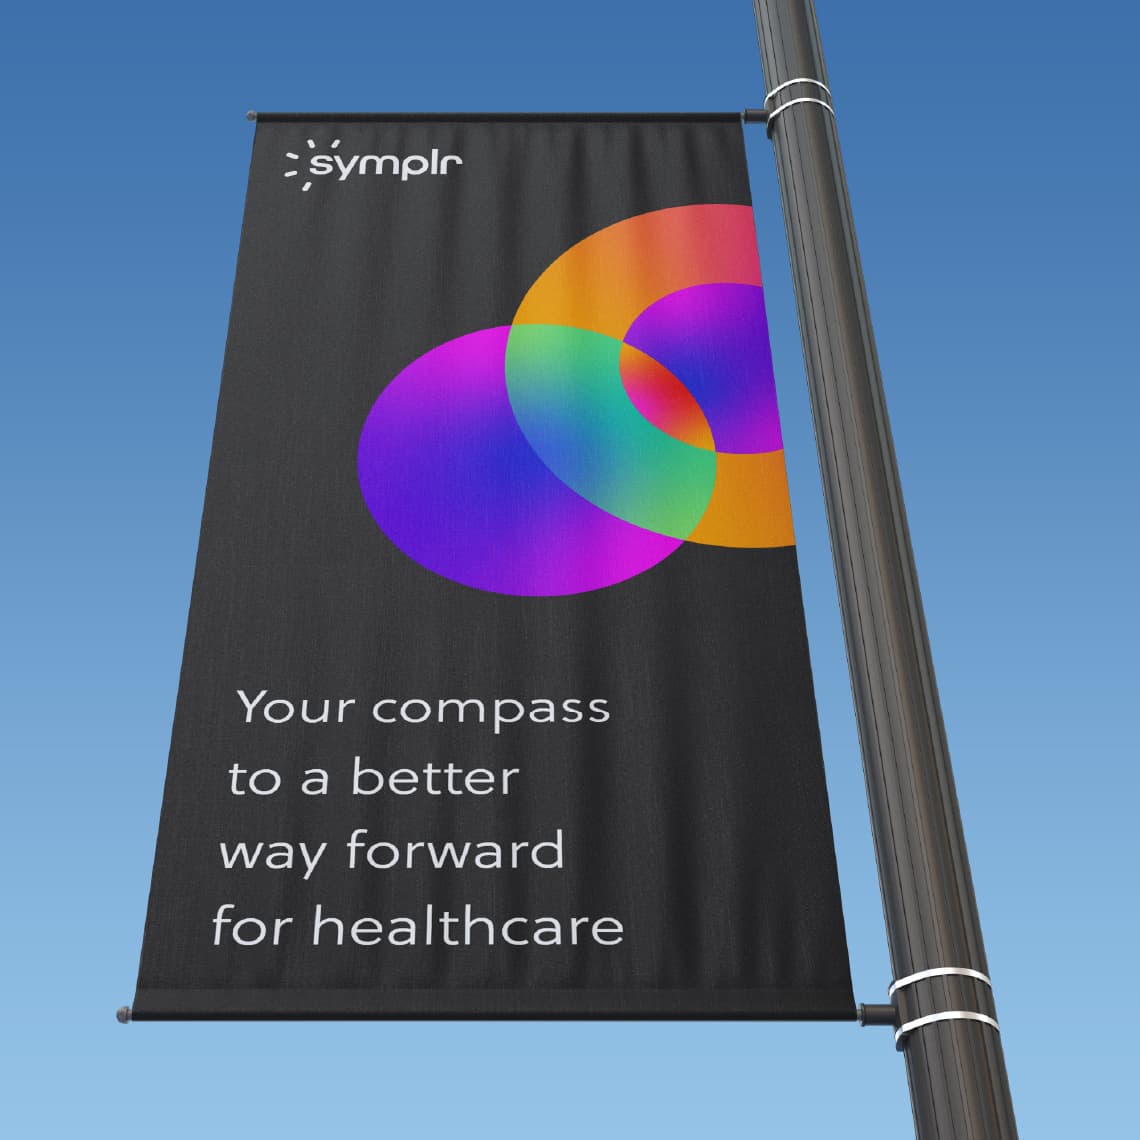 Example of the design system applied in a flagpole banner